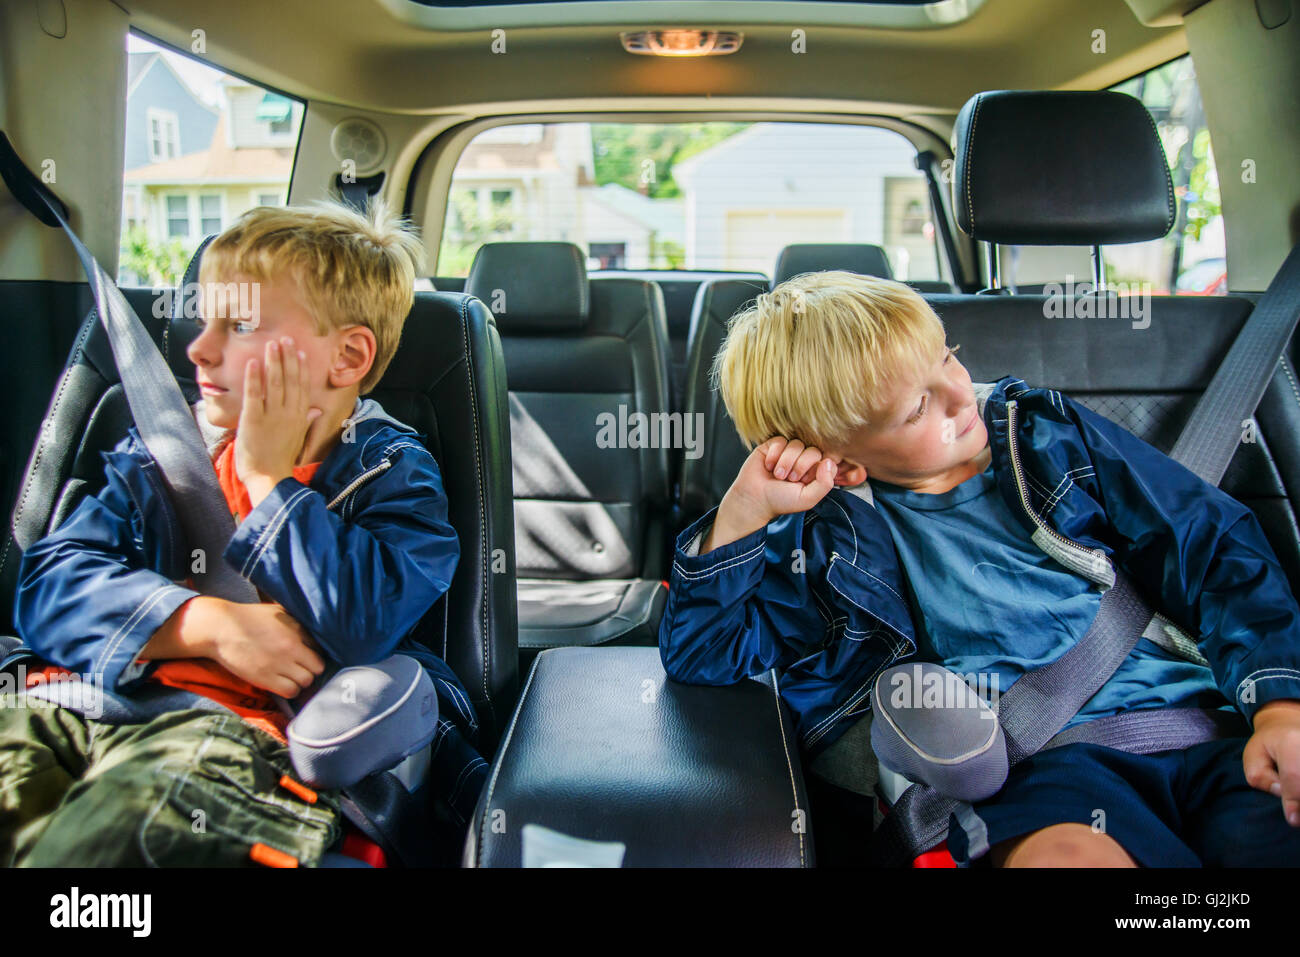 Twin brothers sitting in back of vehicle, bored expressions Stock Photo